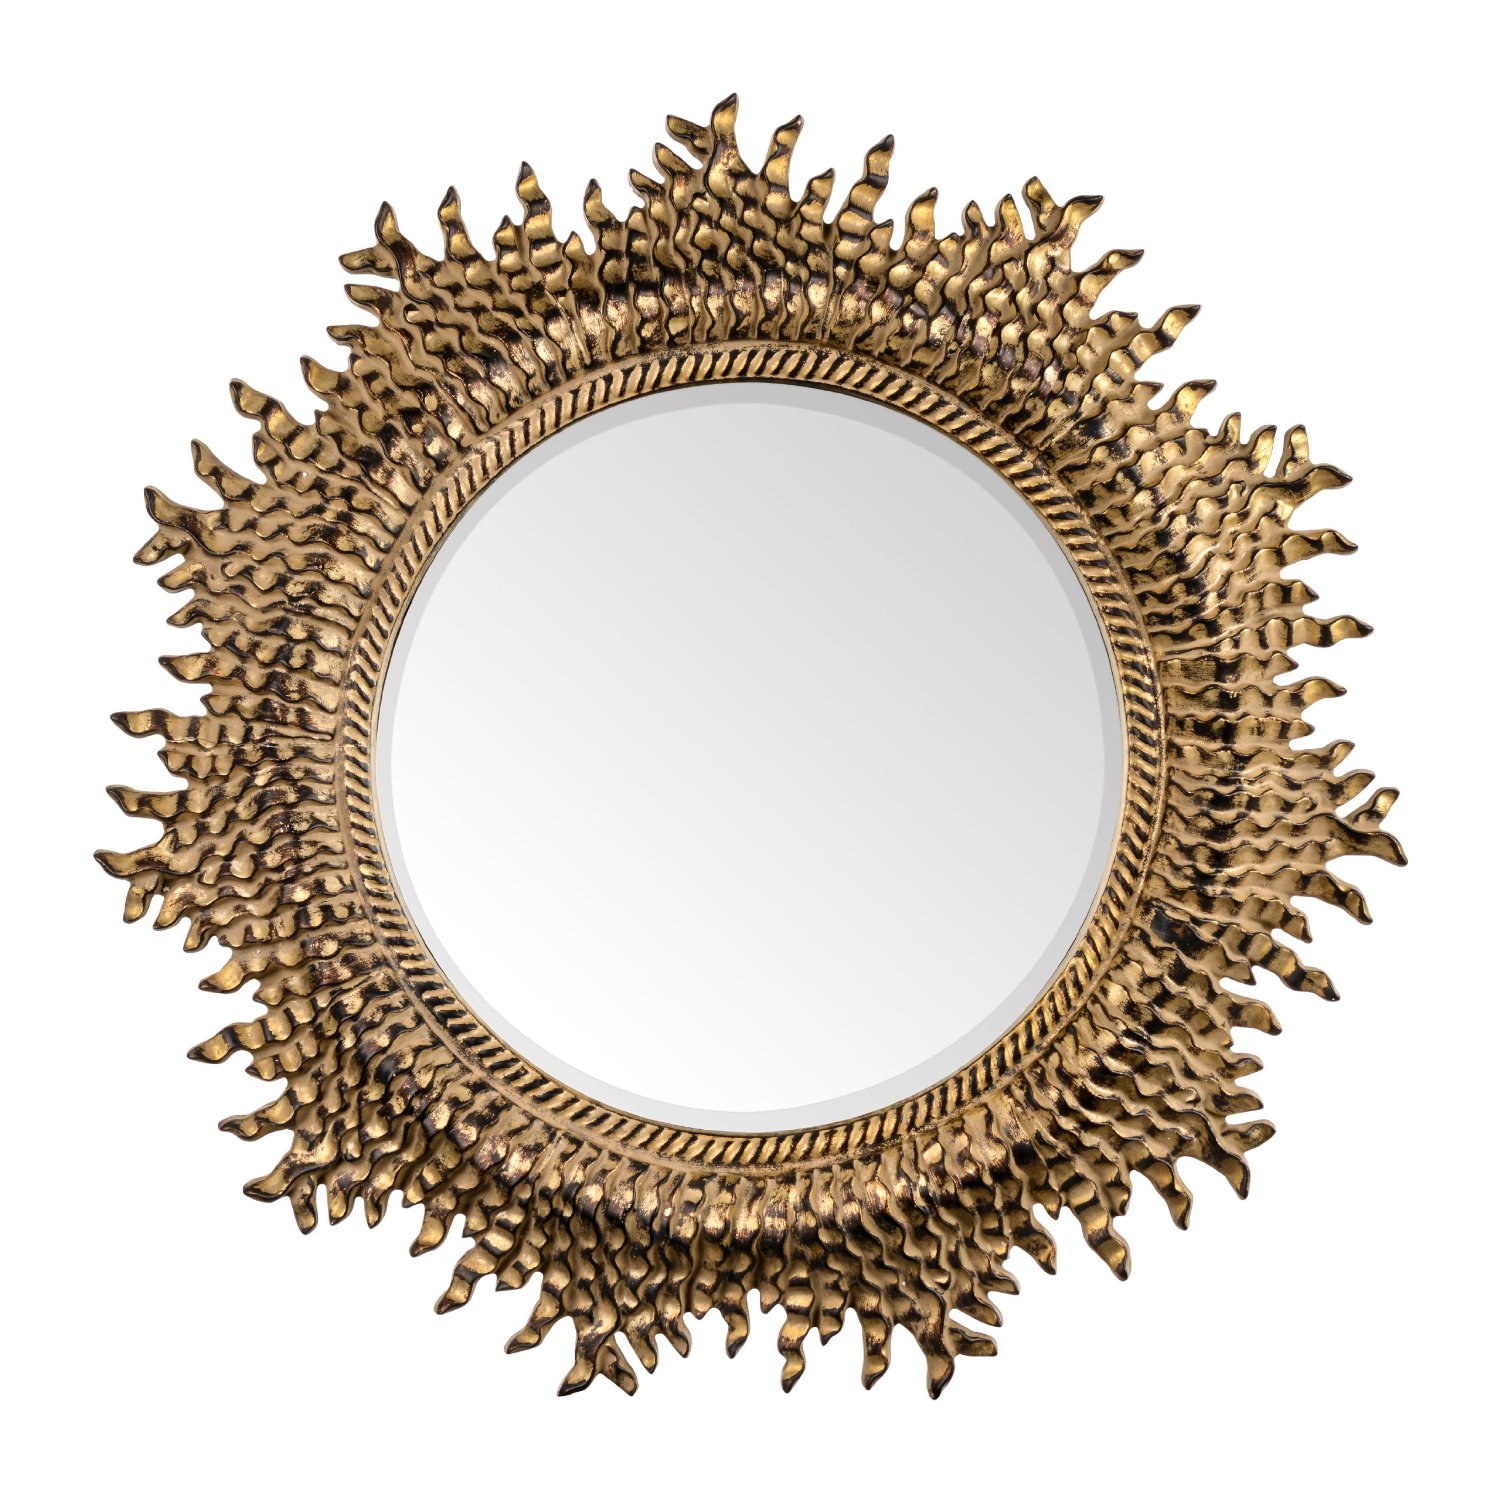 Attractive Vintage Gold Mirror Frame Gift - Picture Frame Ideas ...